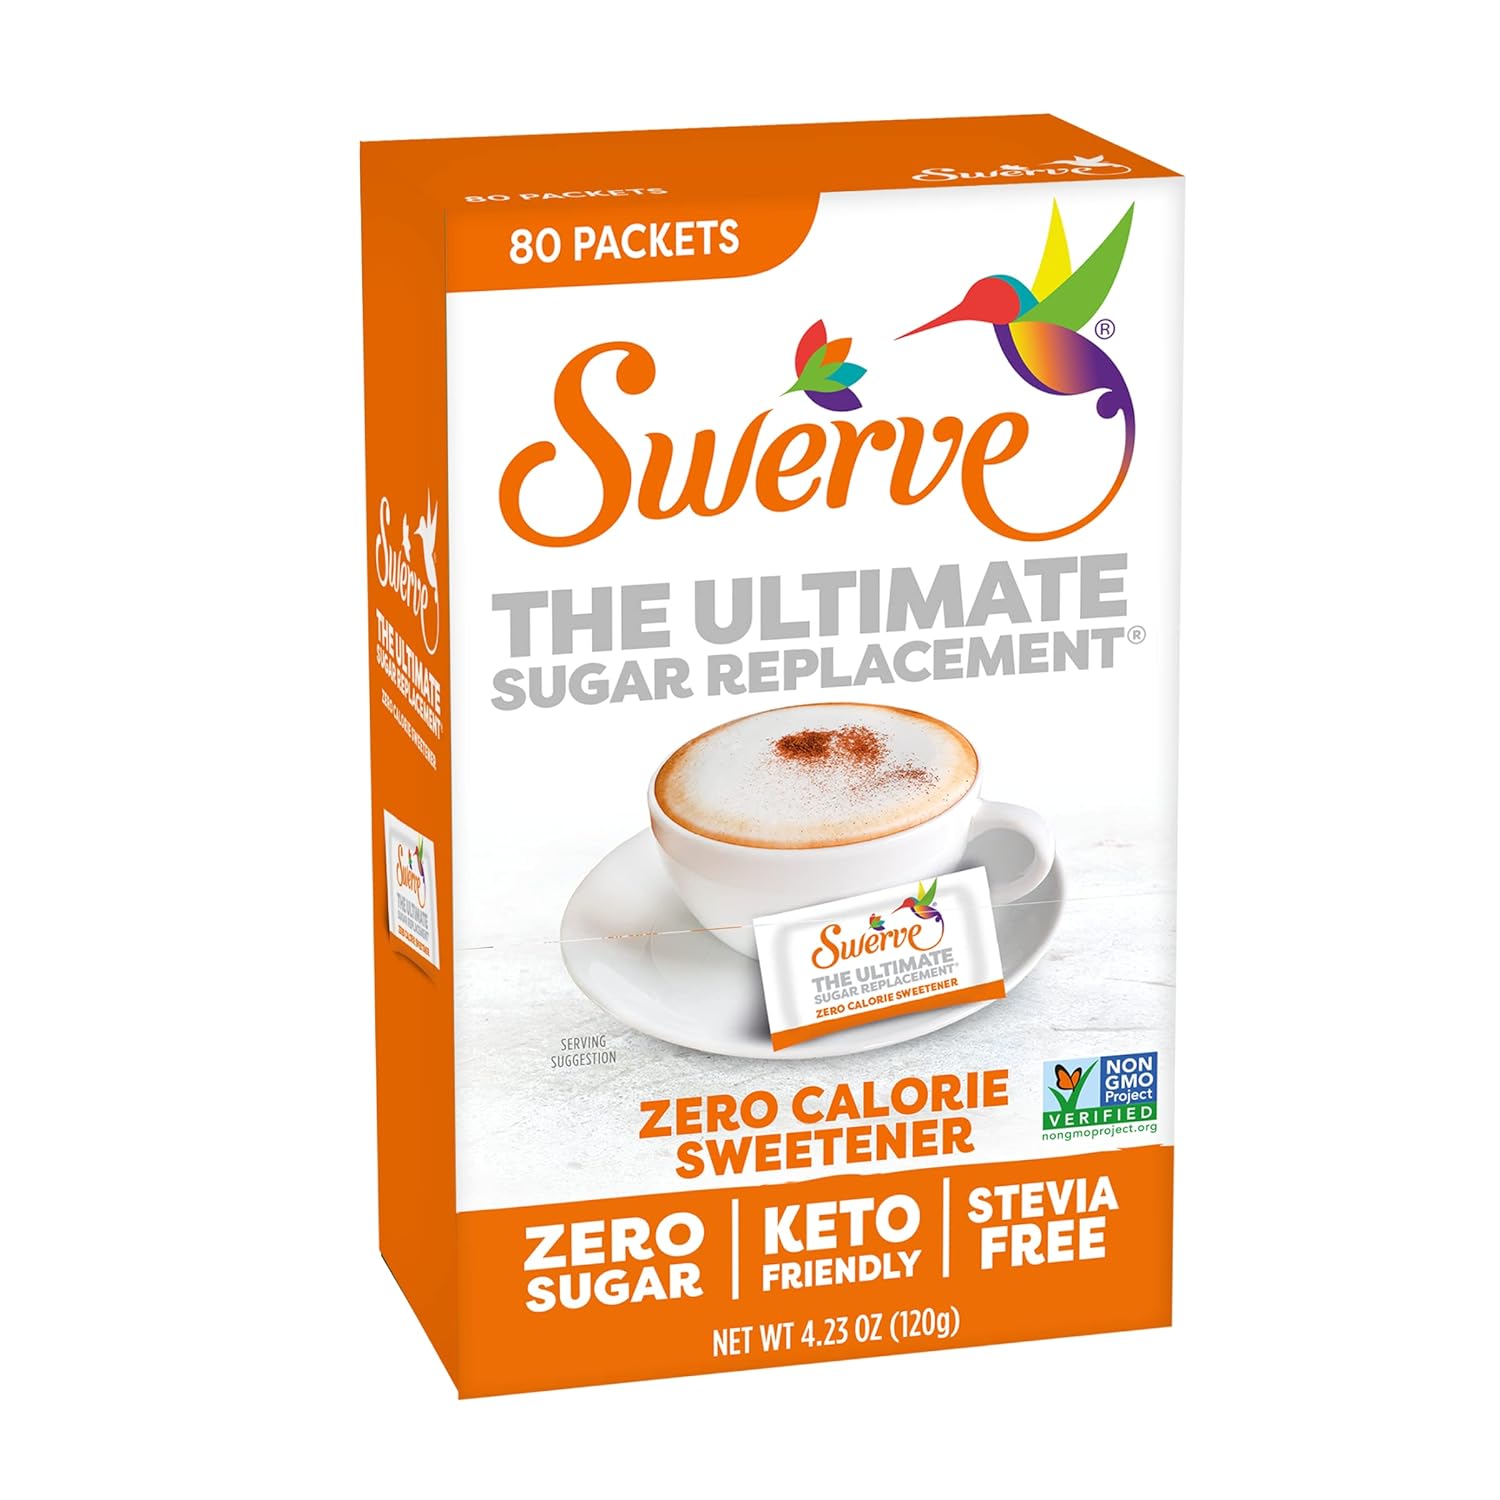 Swerve Zero Calorie Sweetener with Erythritol, Stevia-Free Sugar Replacement, 80 Packets (Pack of 2)